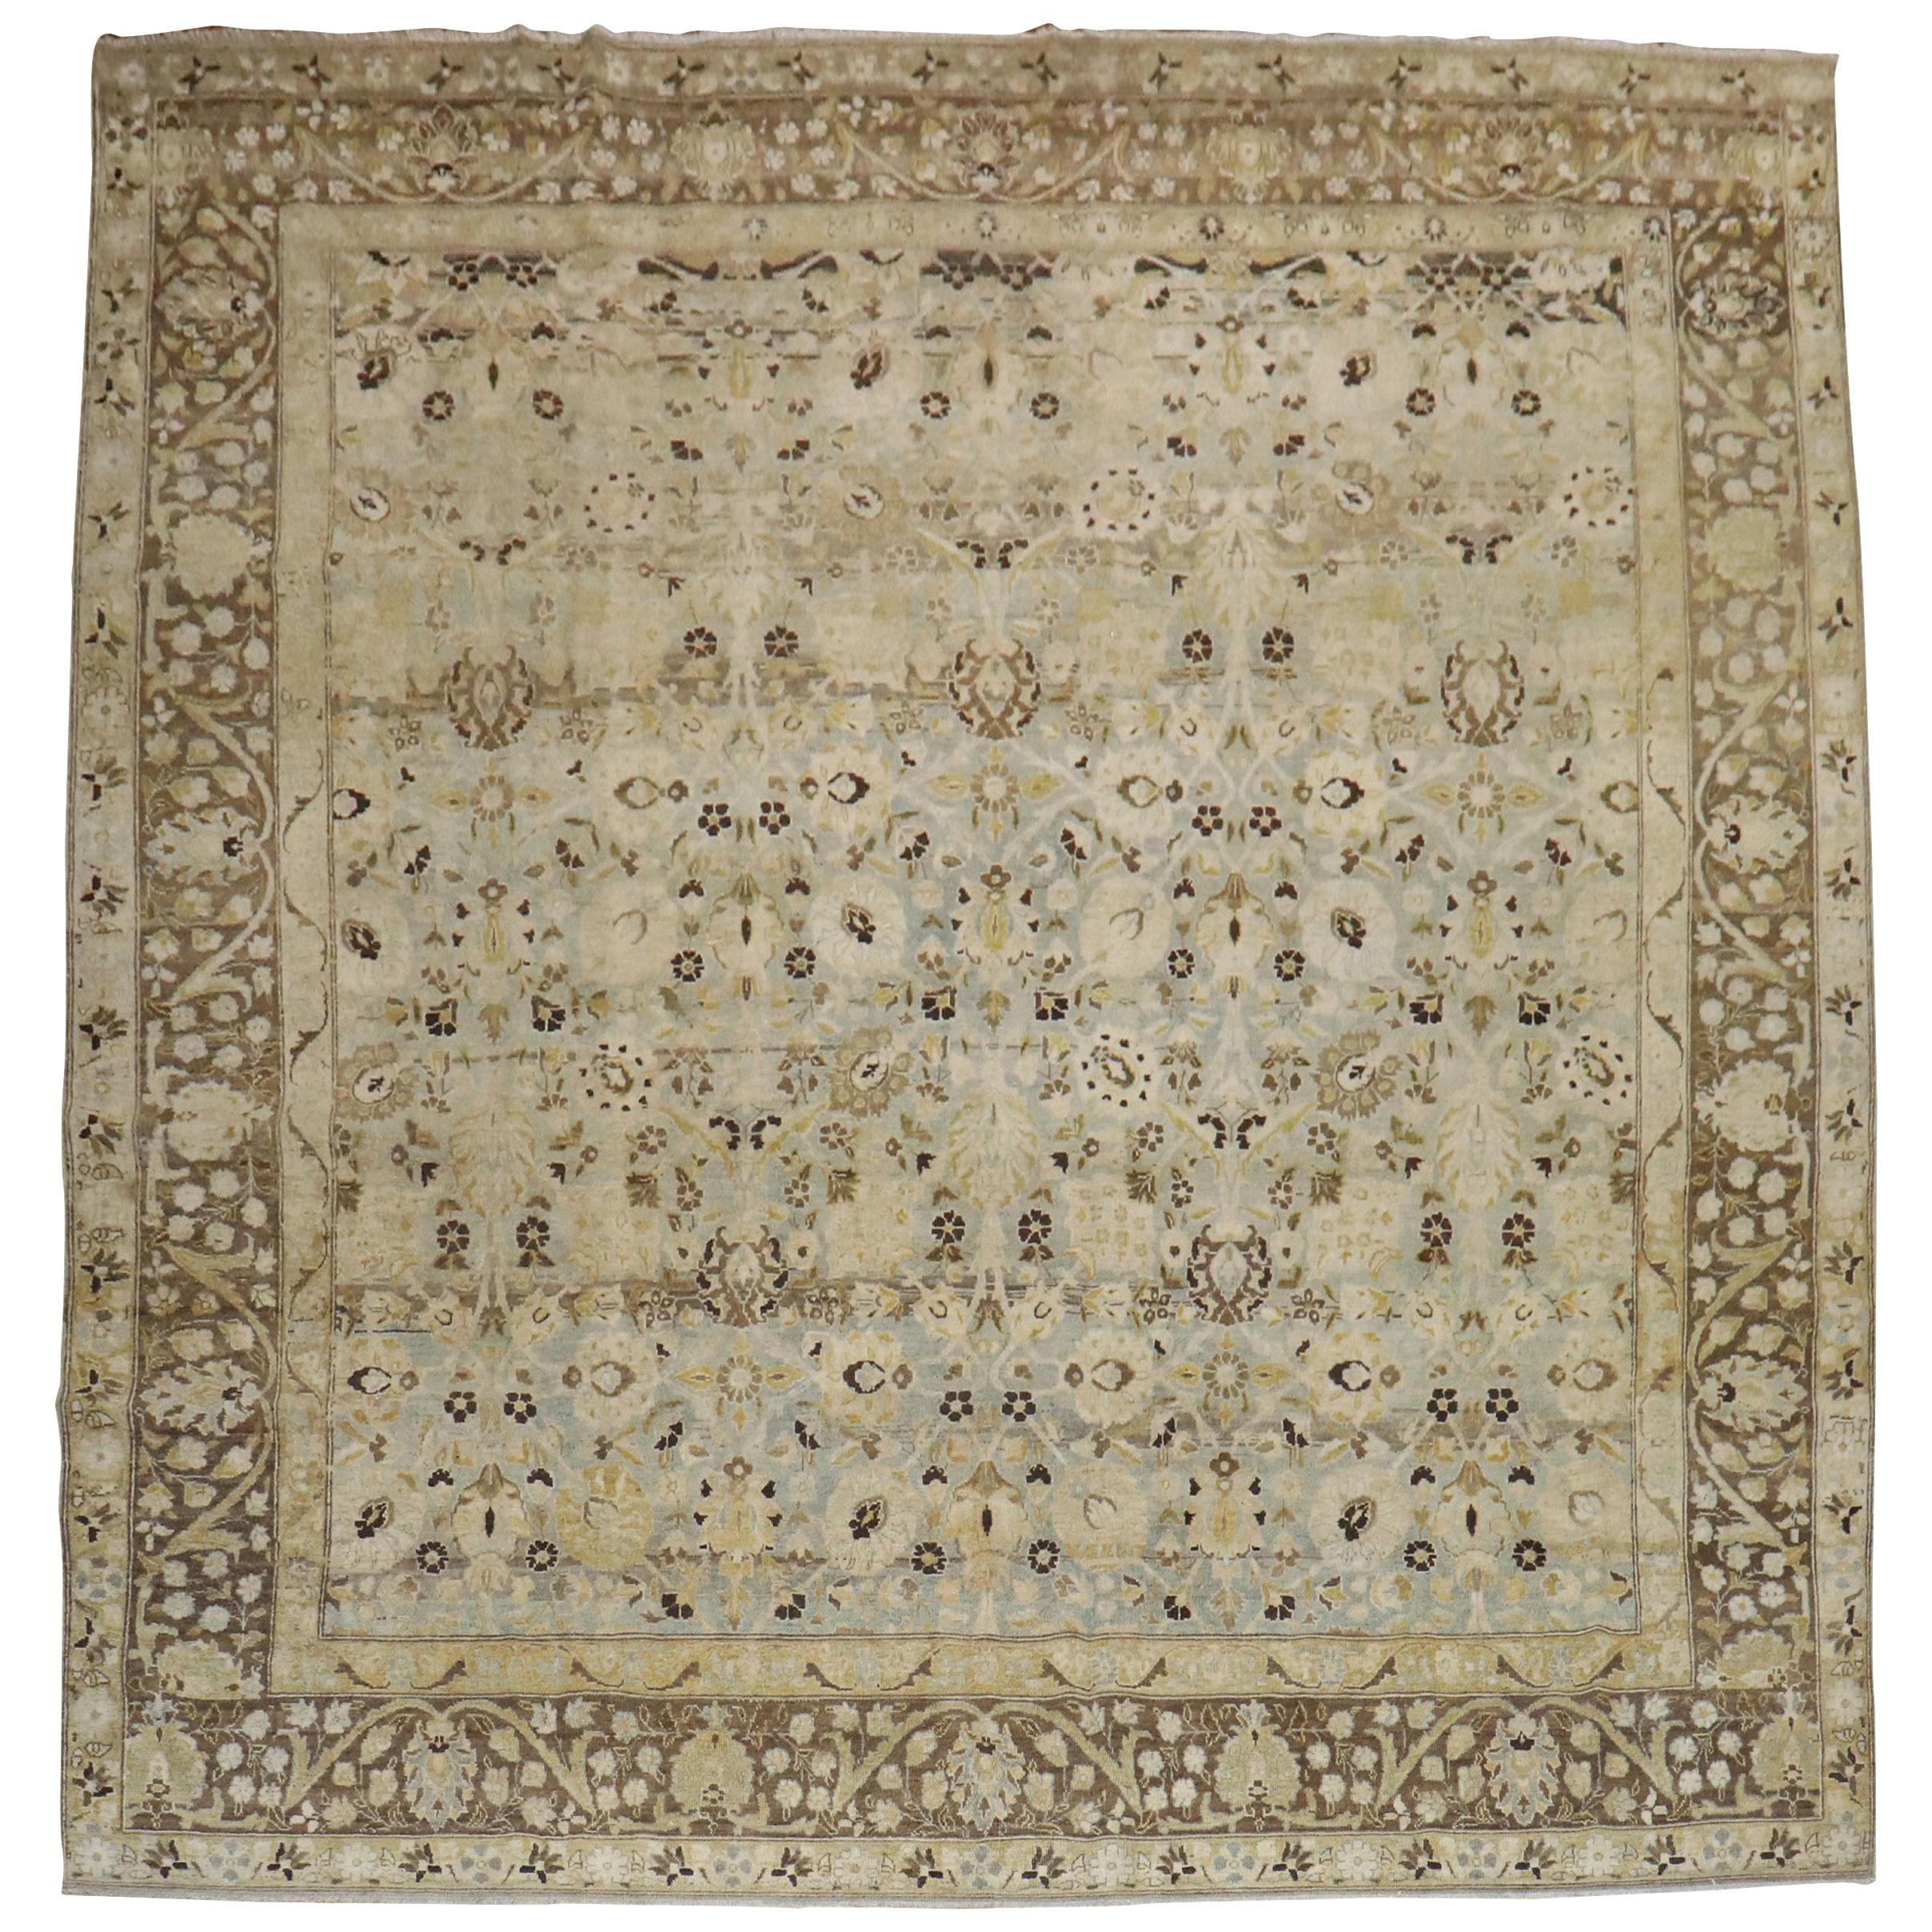 Blue Gray Chartreuse Antique Persian Tabriz Carpet, Early 20th Century For Sale